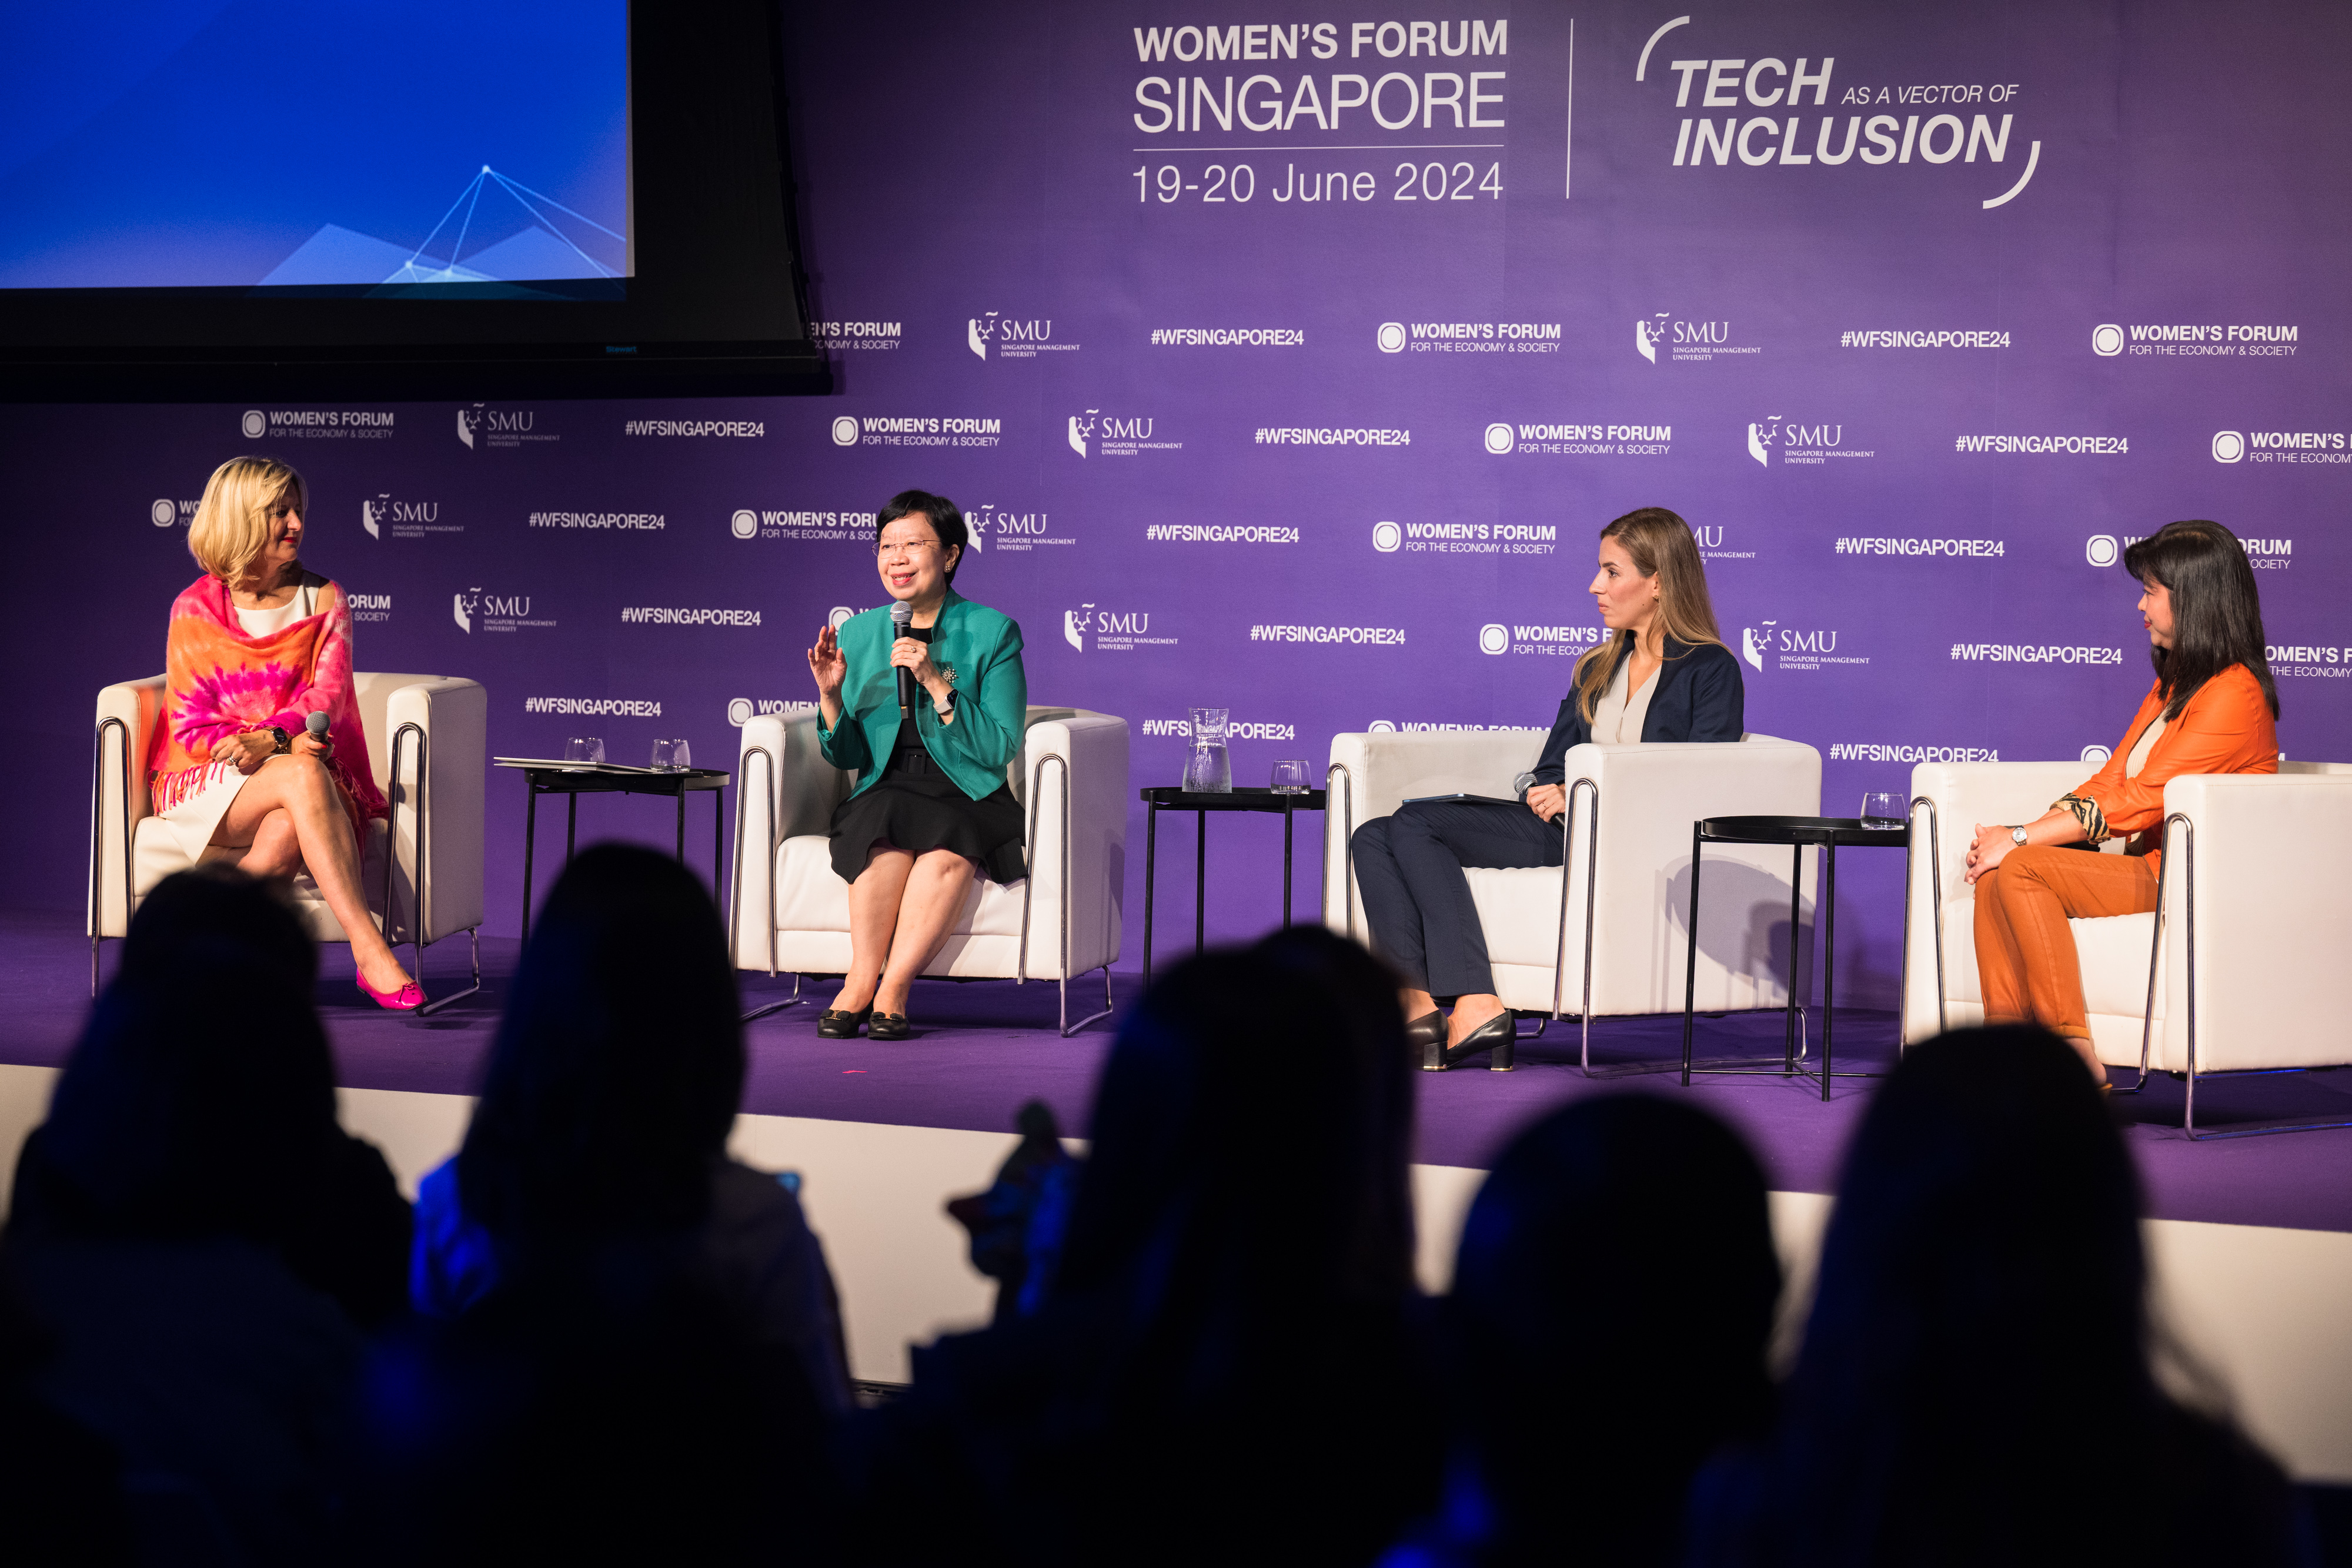 SMU President, Professor Lily Kong sharing insights during panel discussion